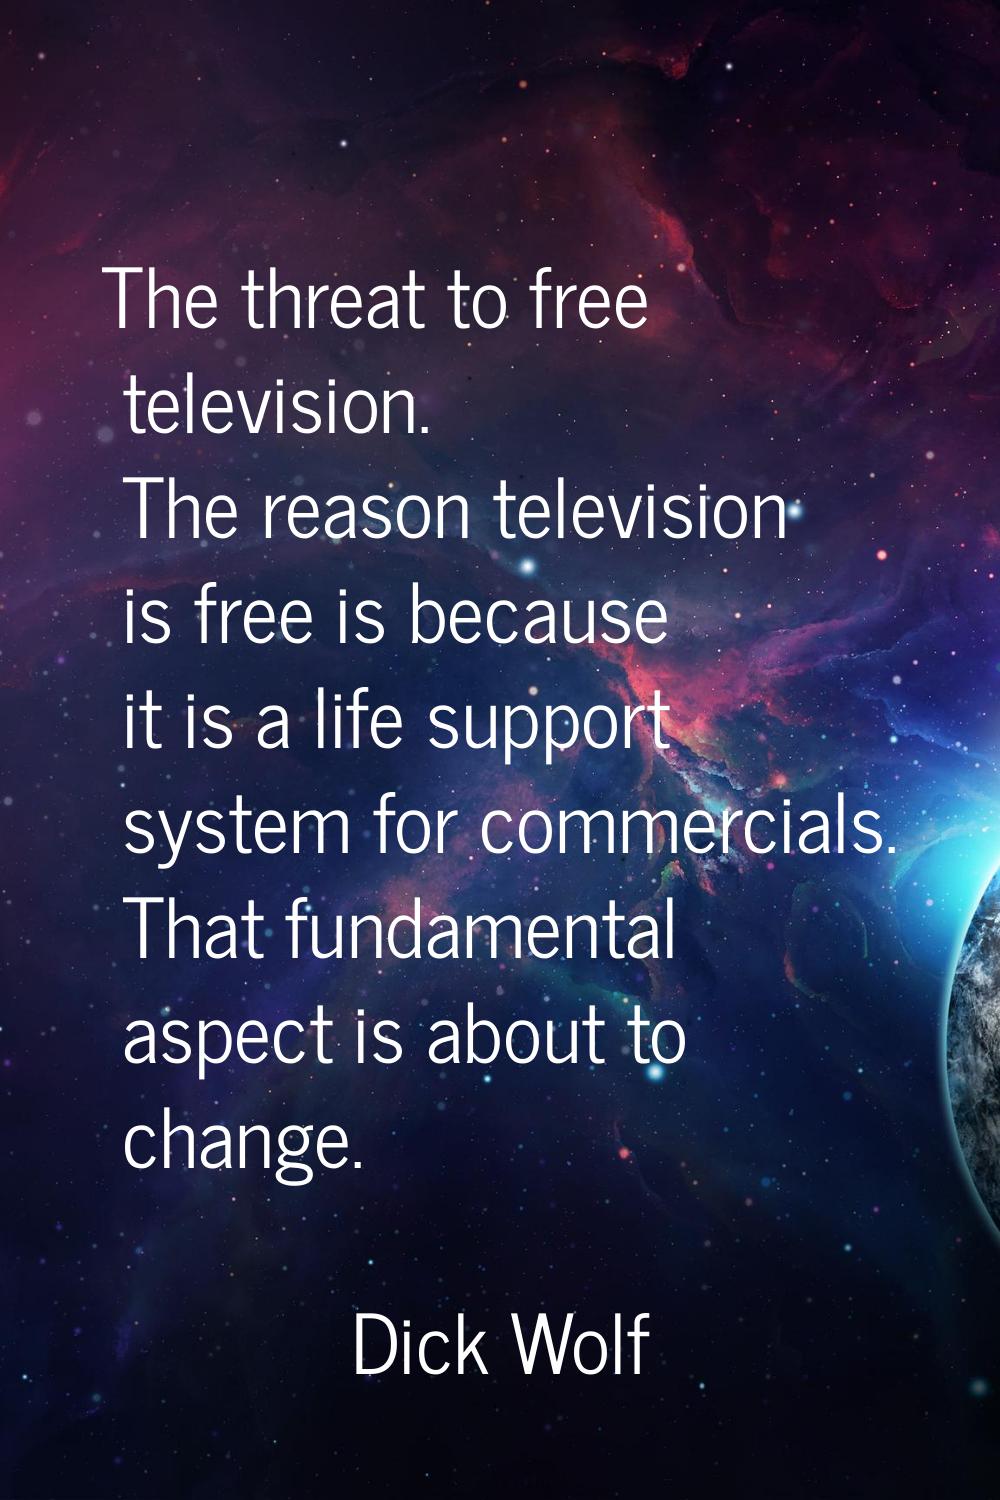 The threat to free television. The reason television is free is because it is a life support system